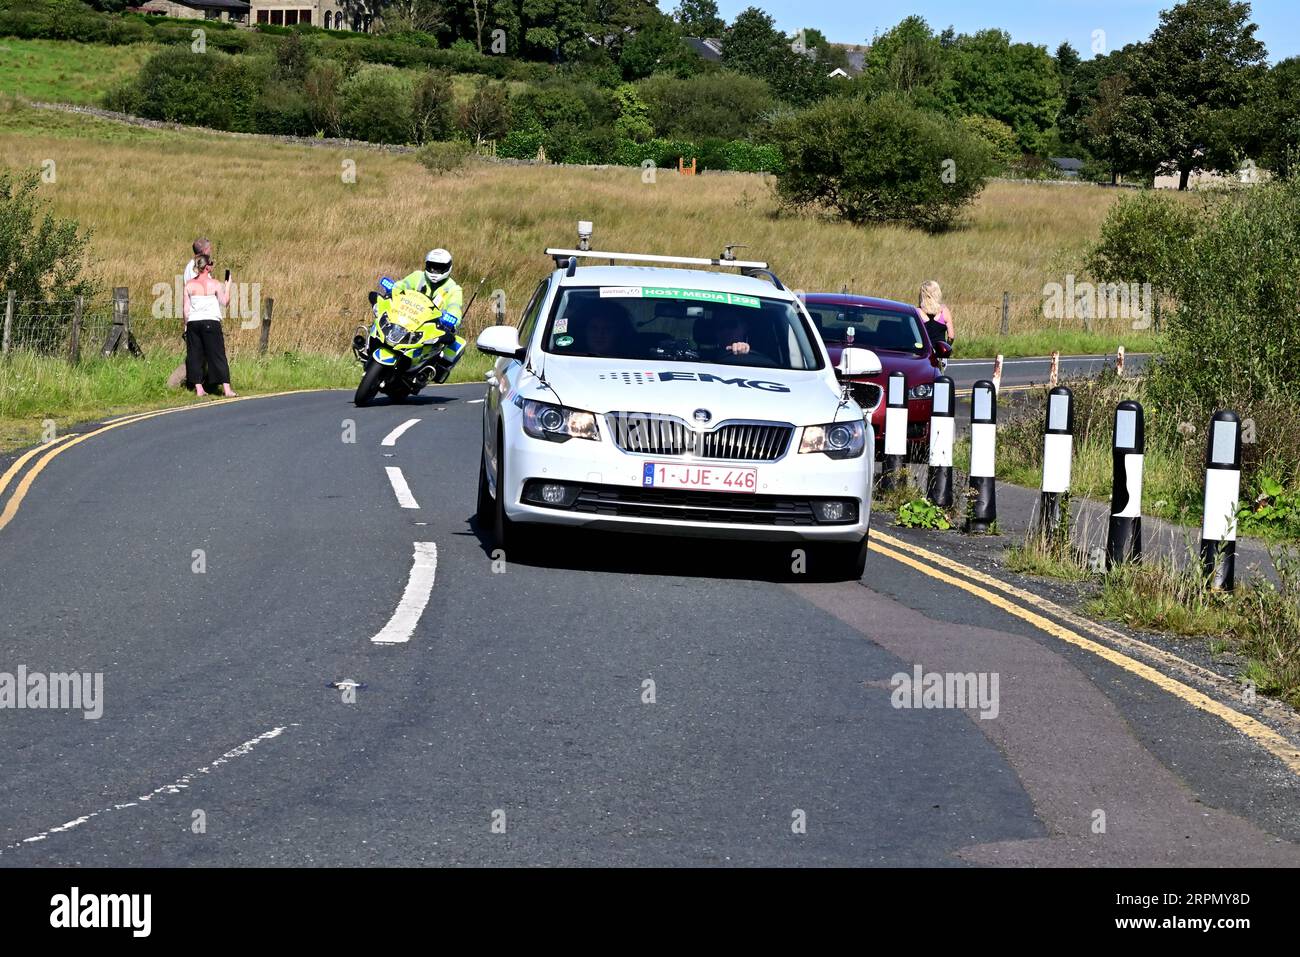 Around the UK - Stage 1 of the Tour of Britain, cycle race EMG Host Media vehicle Stock Photo